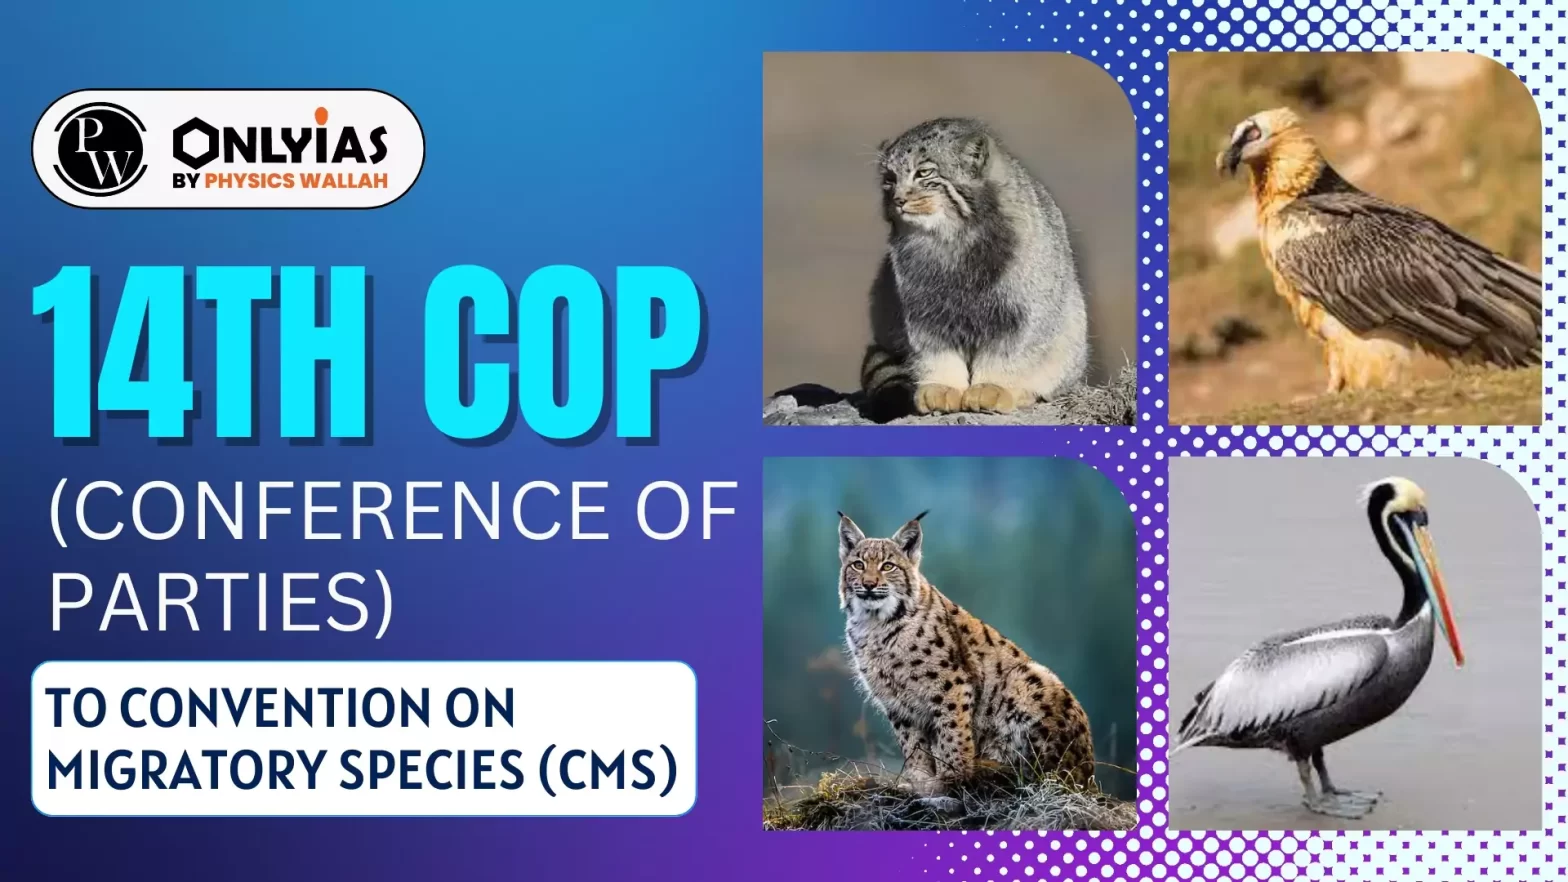 14th CoP (Conference of Parties) to Convention On Migratory Species (CMS)